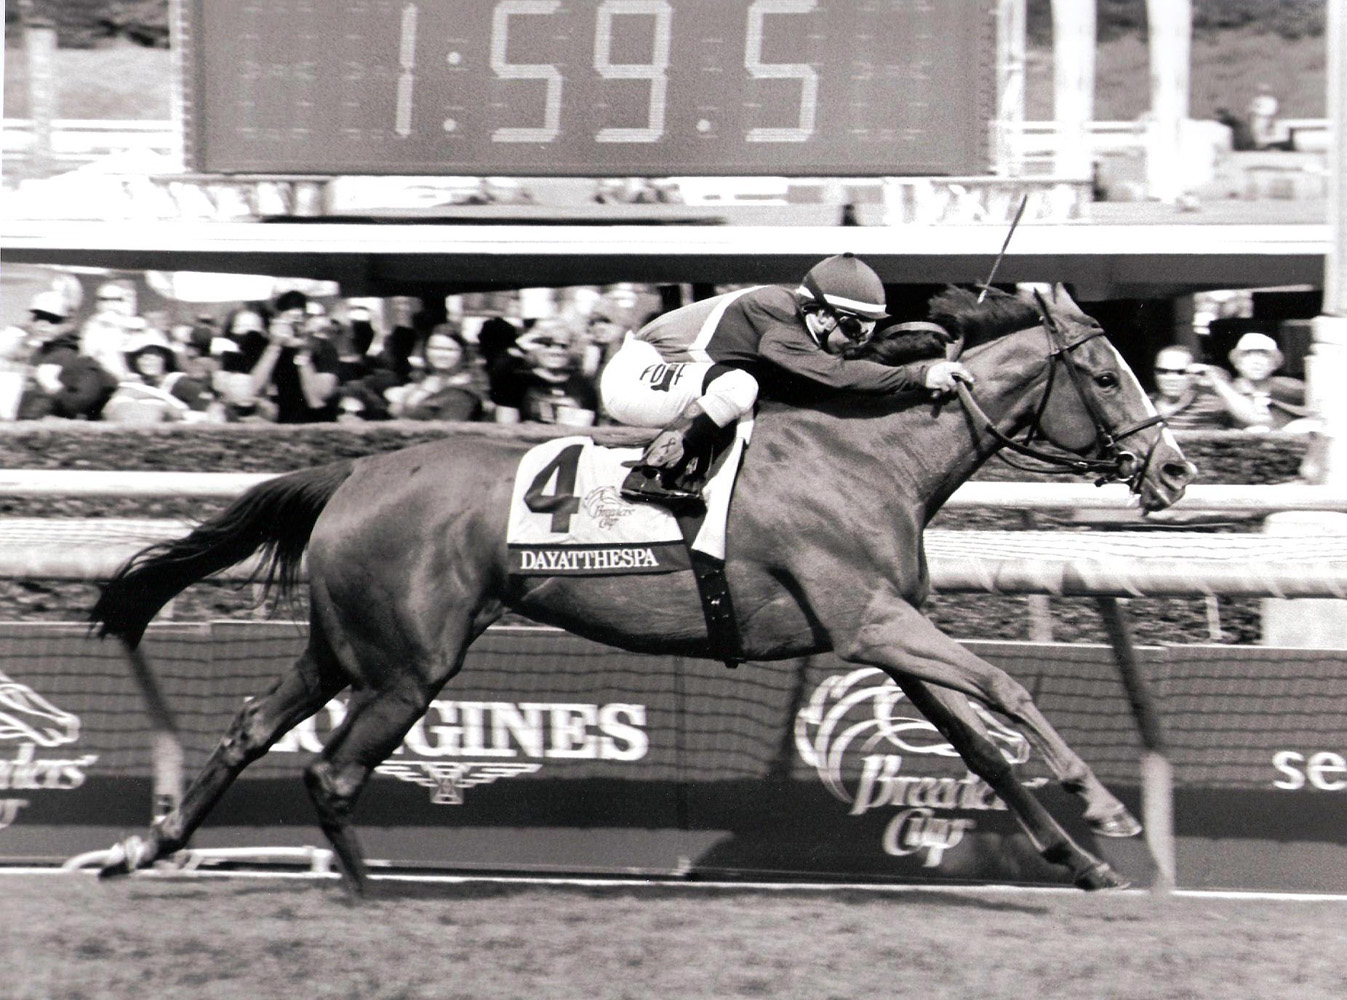 Javier Castellano and Dayatthespa winning the 2014 Breeders' Cup Filly & Mare Turf at Santa Anita (Bill Mochon/Museum Collection)